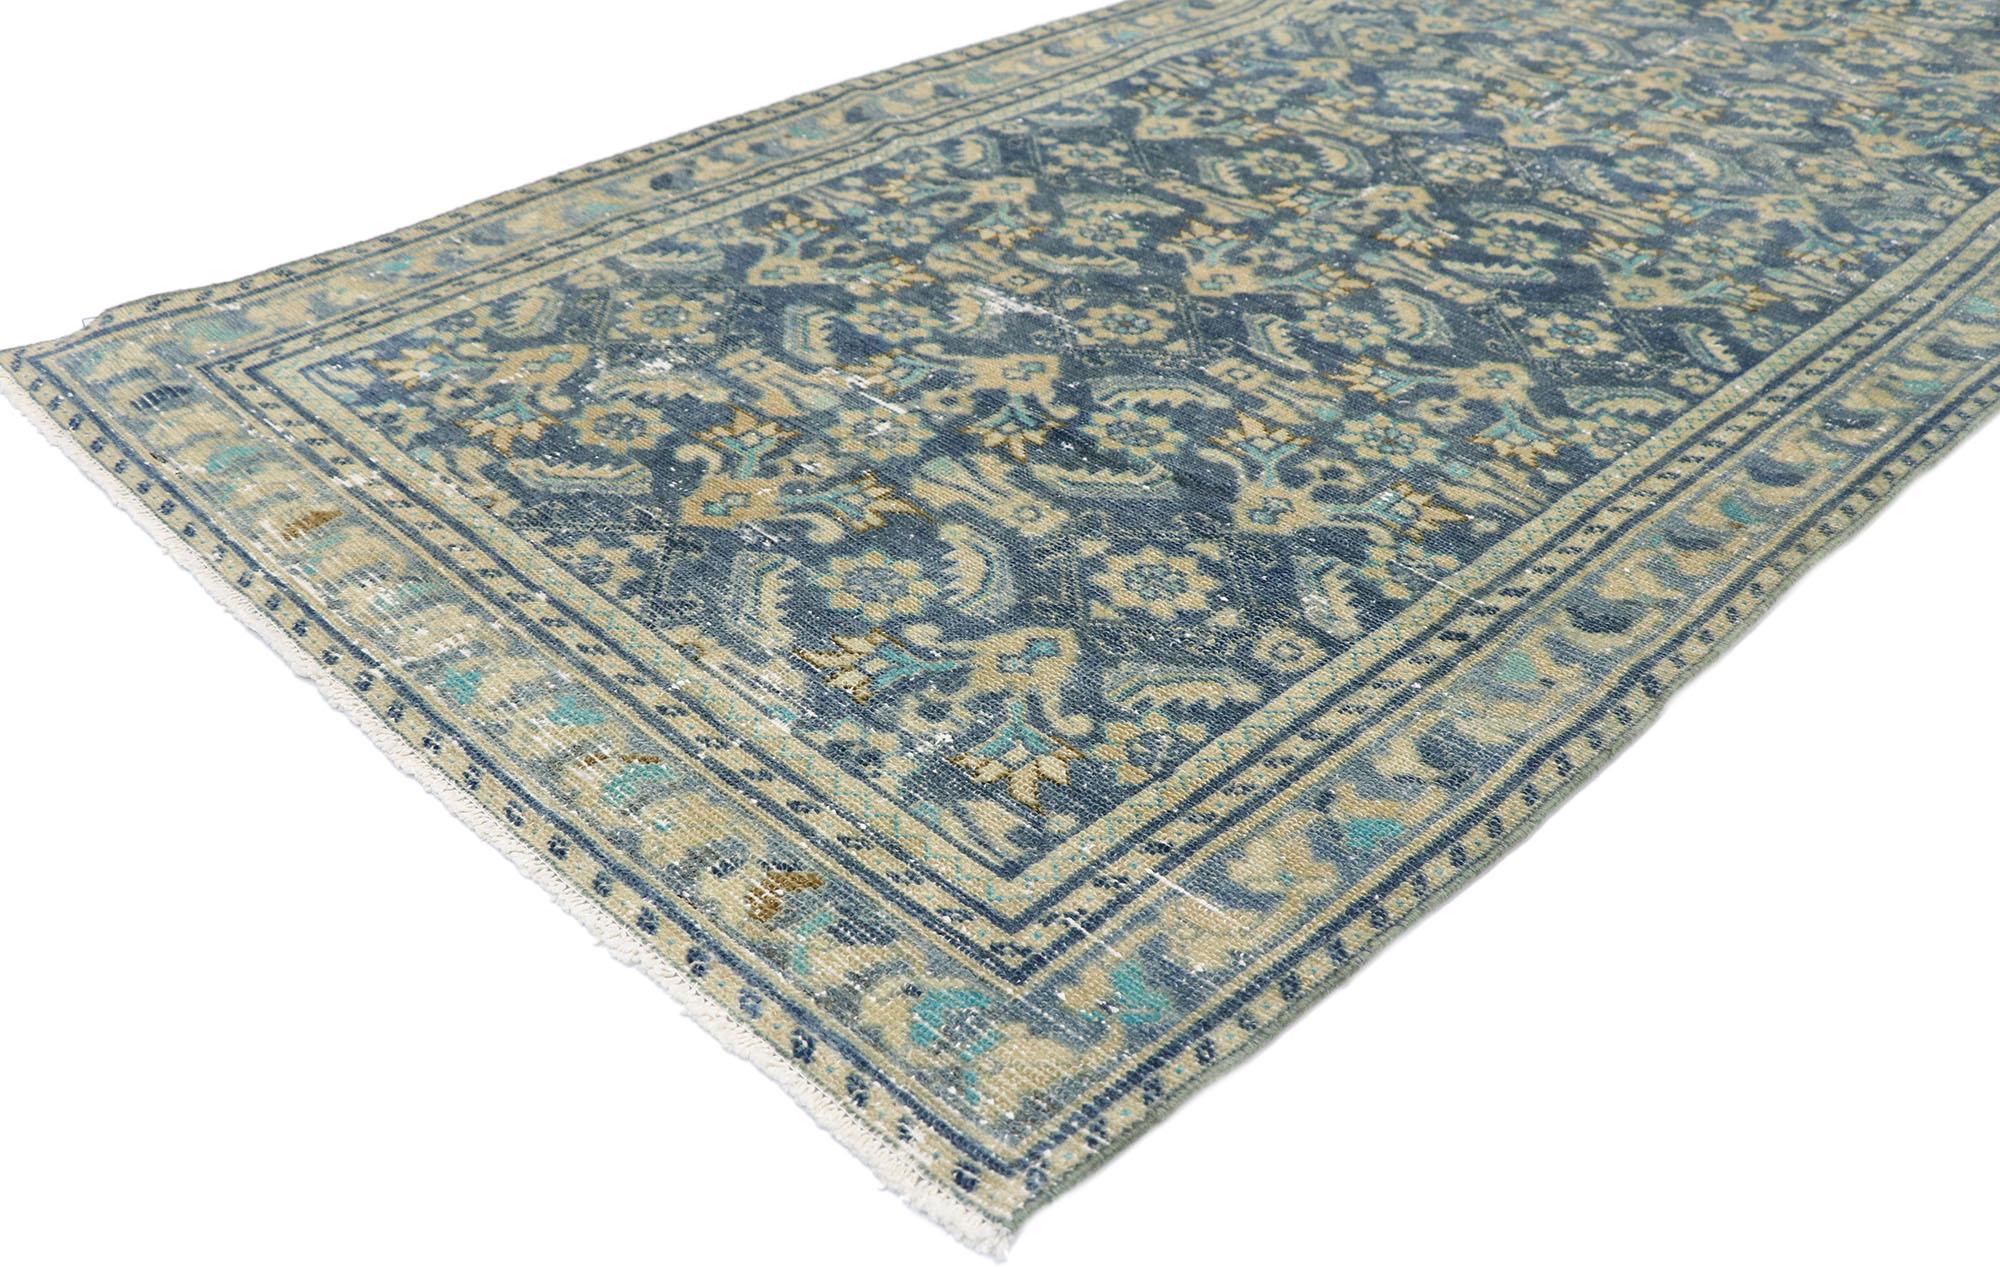 60835 distressed antique Persian Malayer Runner with Greek Mediterranean style. Cleverly composed and distinctively well-balanced, this hand knotted wool distressed antique Persian Malayer runner will take on a curated lived-in look that feels